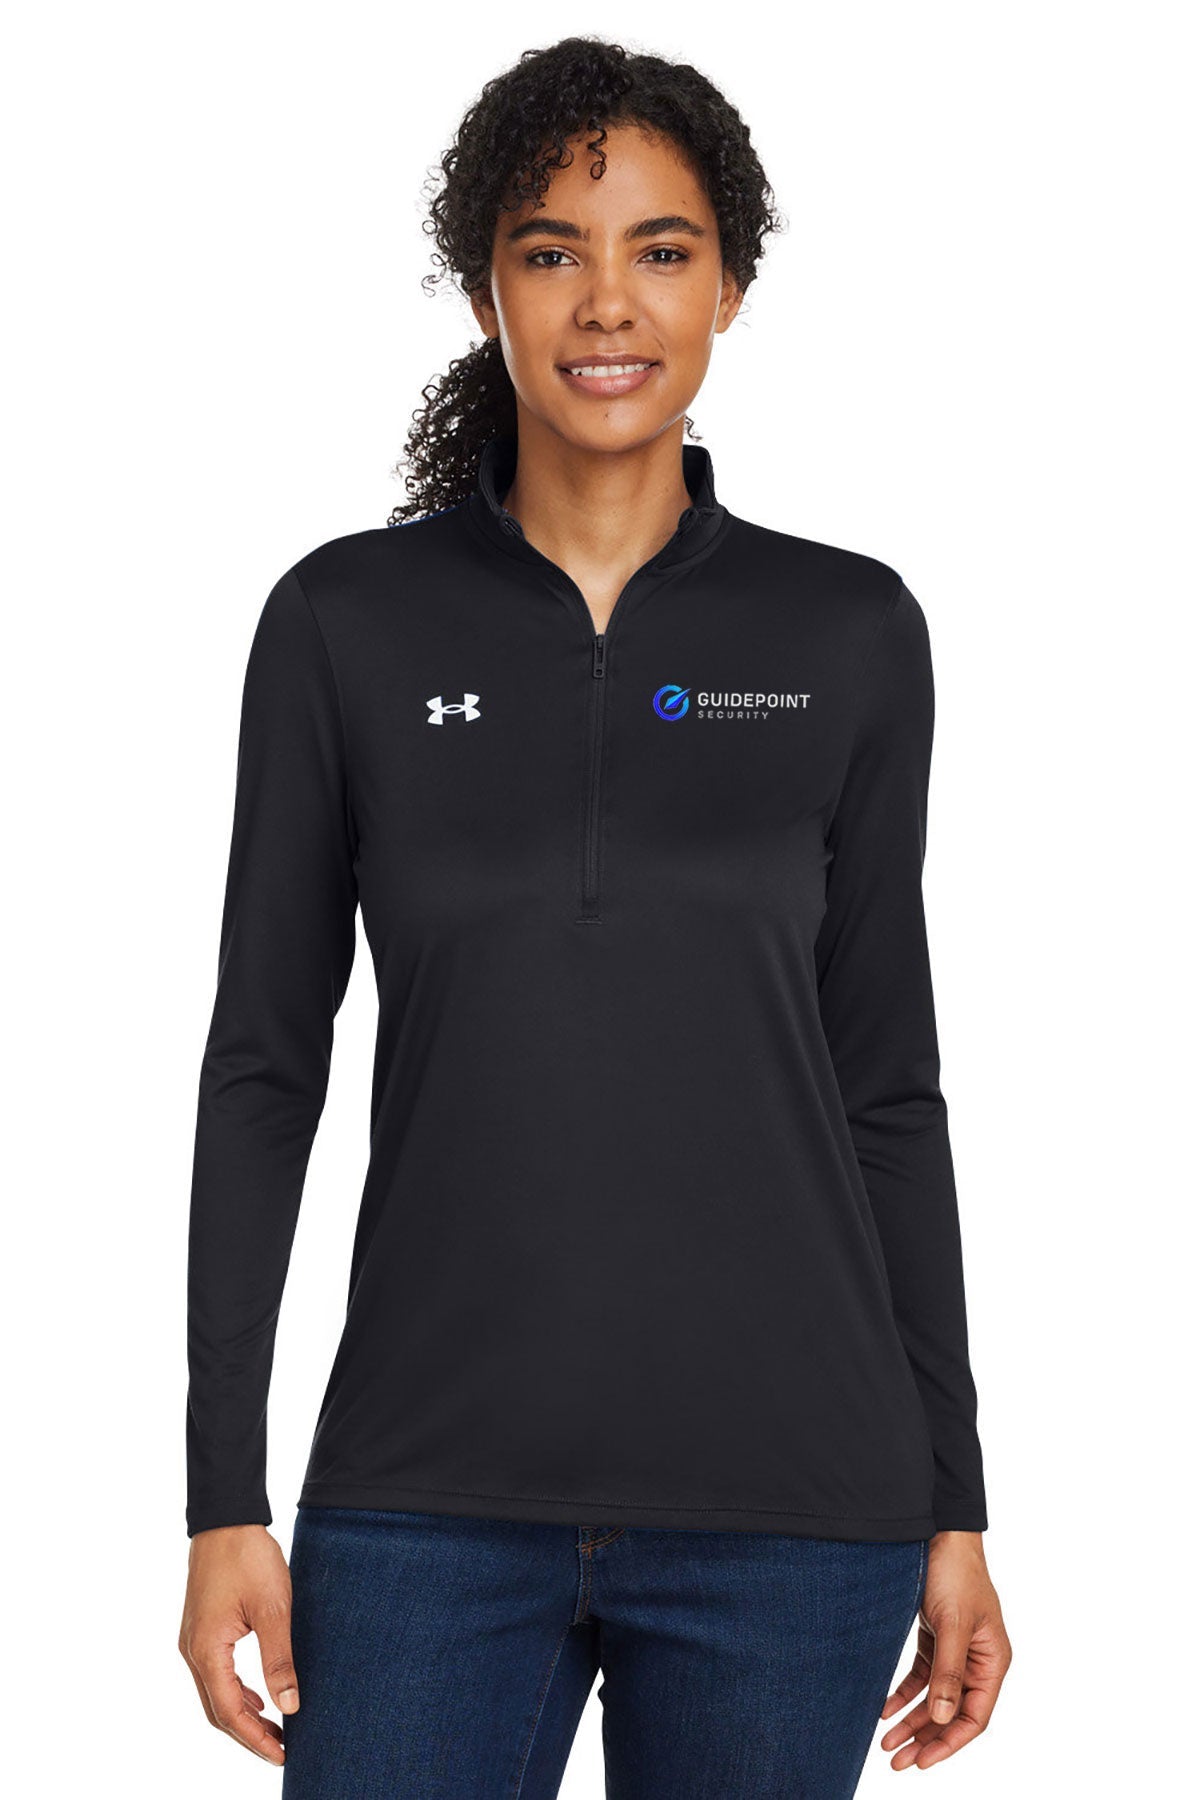 Under Armour Ladies Tech Customized Half-Zips, Black [GuidePoint Security]